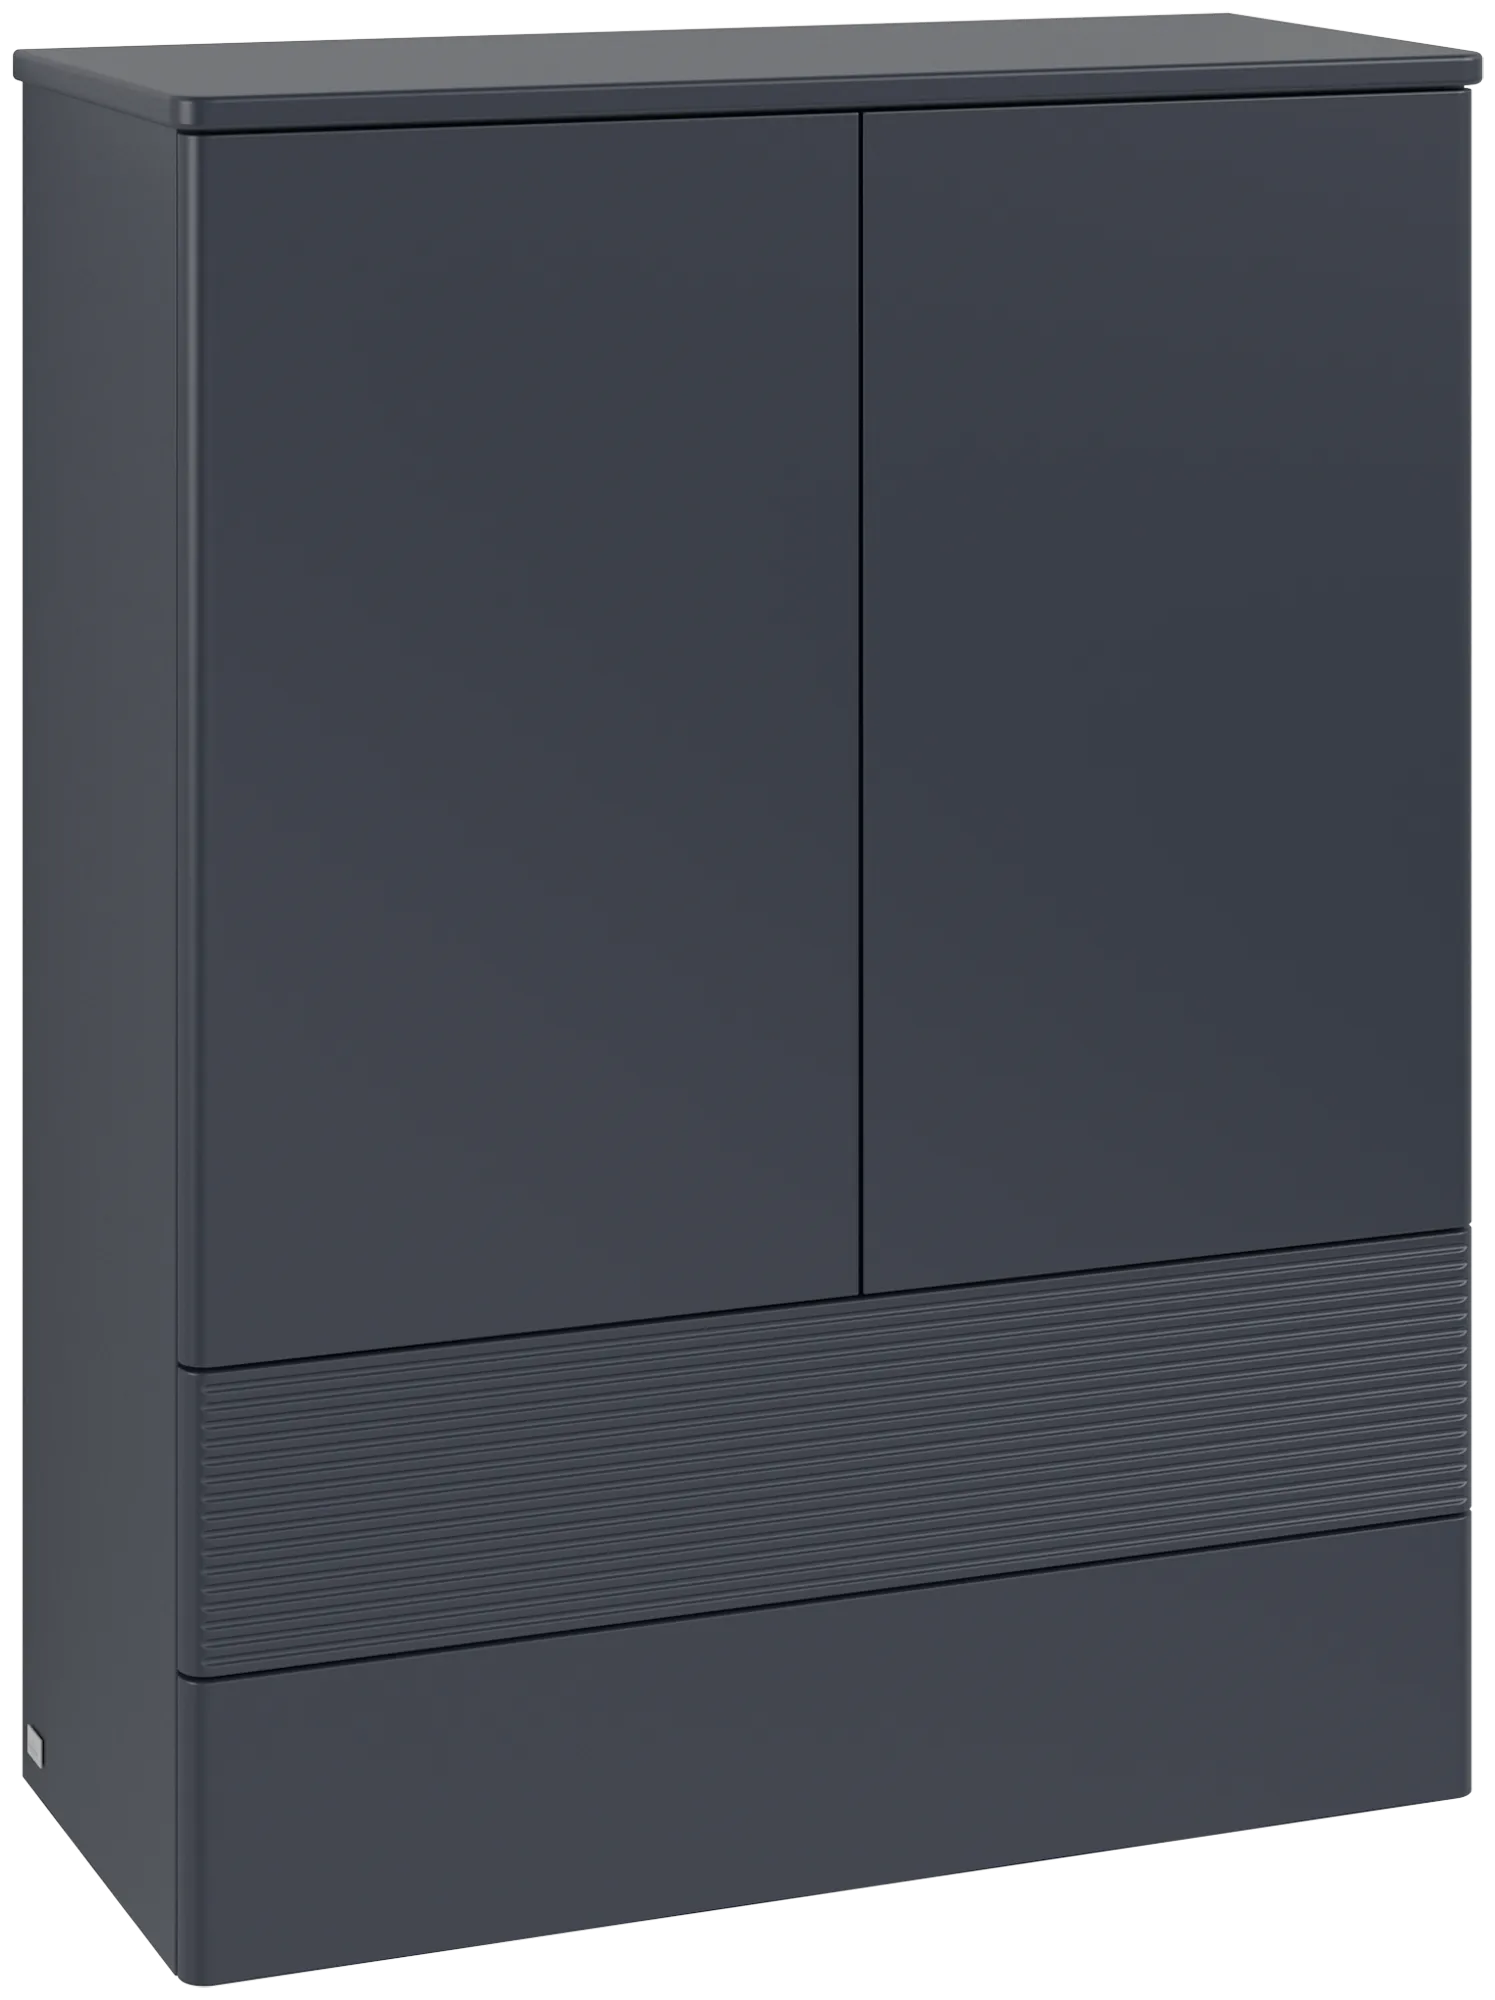 Picture of VILLEROY BOCH Antao Highboard, 2 doors, 814 x 1039 x 356 mm, Front with grain texture, Midnight Blue Matt Lacquer / Midnight Blue Matt Lacquer #K47100HG